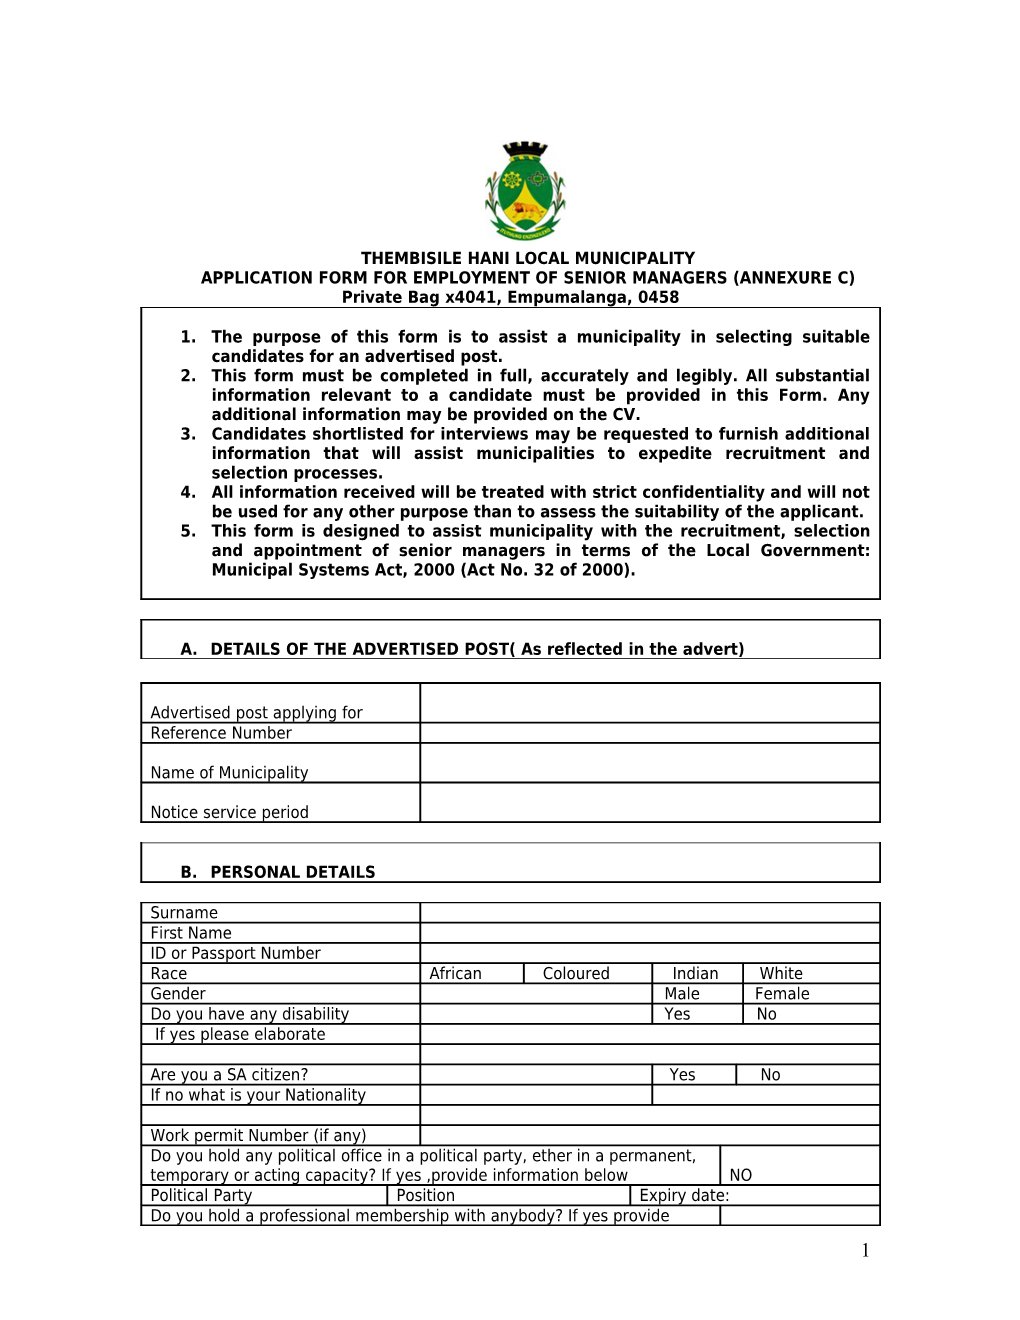 Application Form for Employment of Senior Managers (Annexure C)